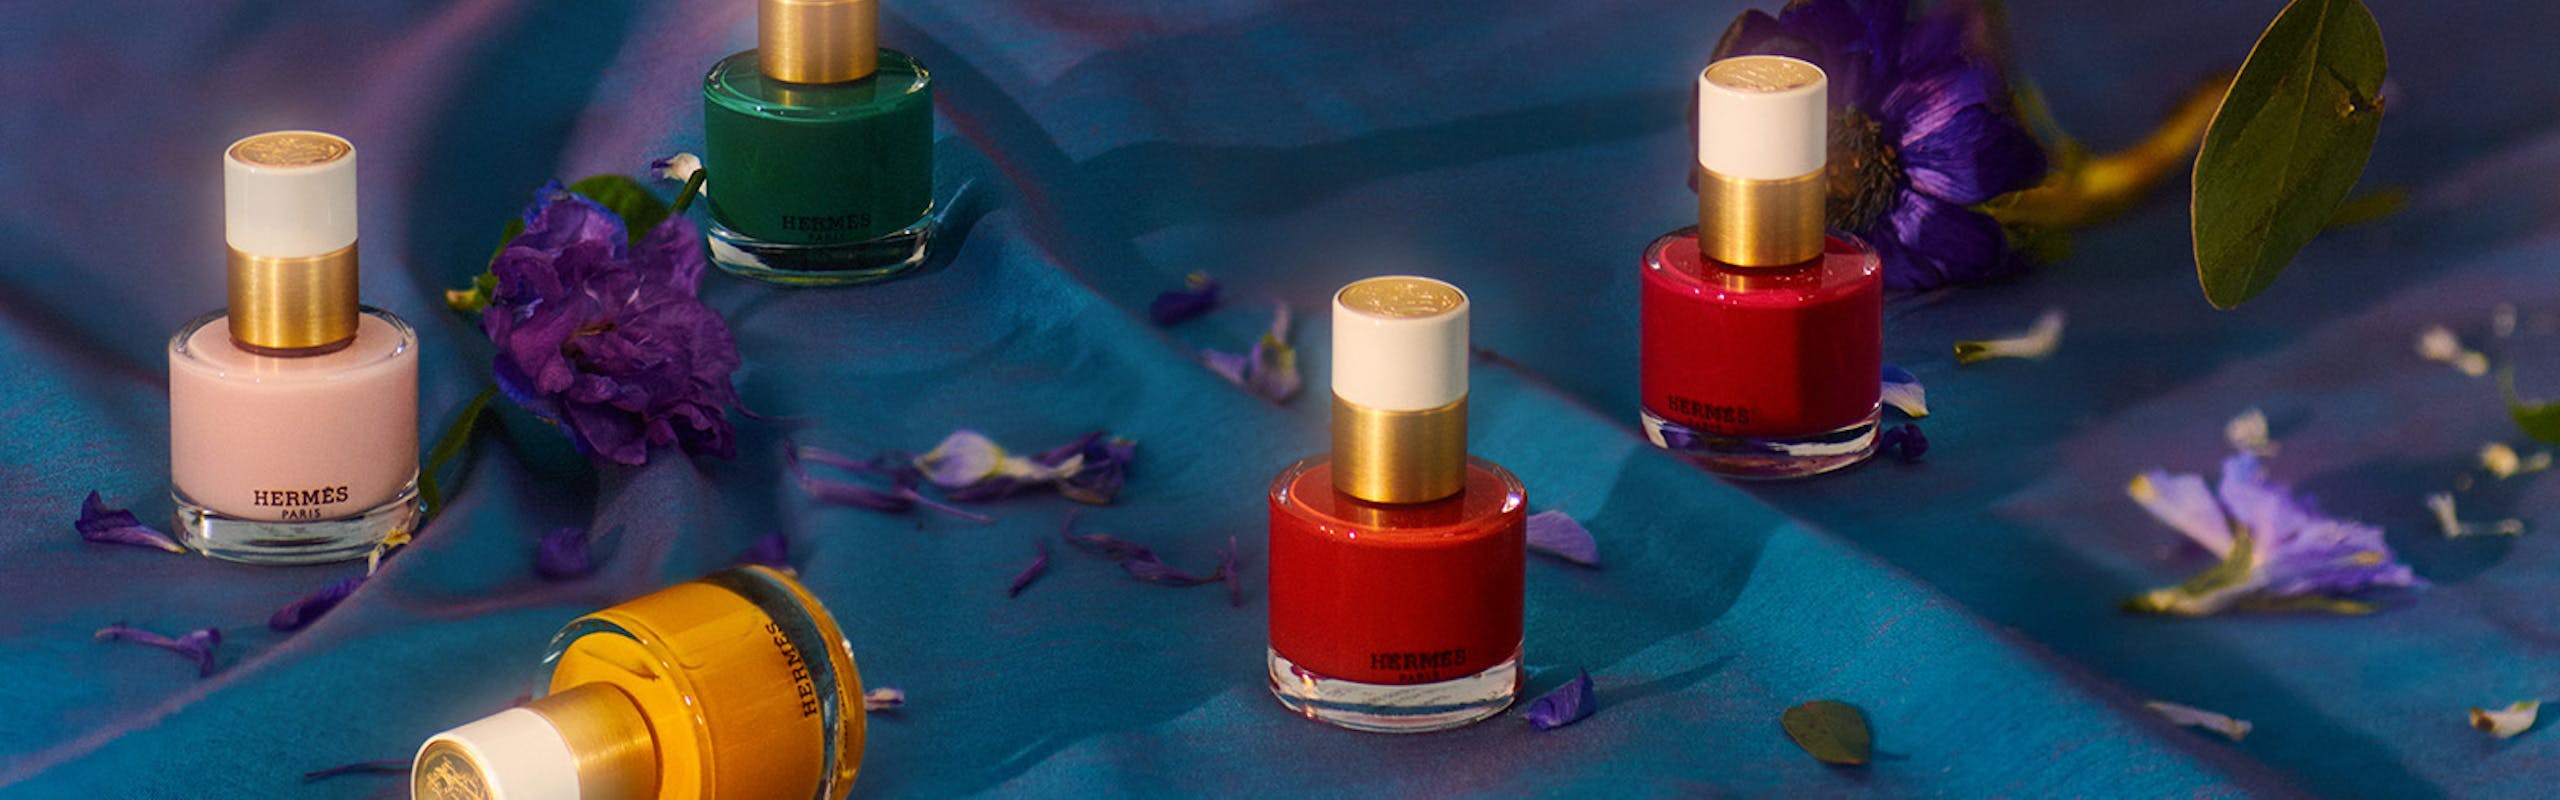  HERMÈS LES MAINS, $74. Available in 24 rich shades, Hermès’ nail enamel will add a little pizzazz to your hands, no matter the colour you pick. As they say, life’s too short to have naked nails.